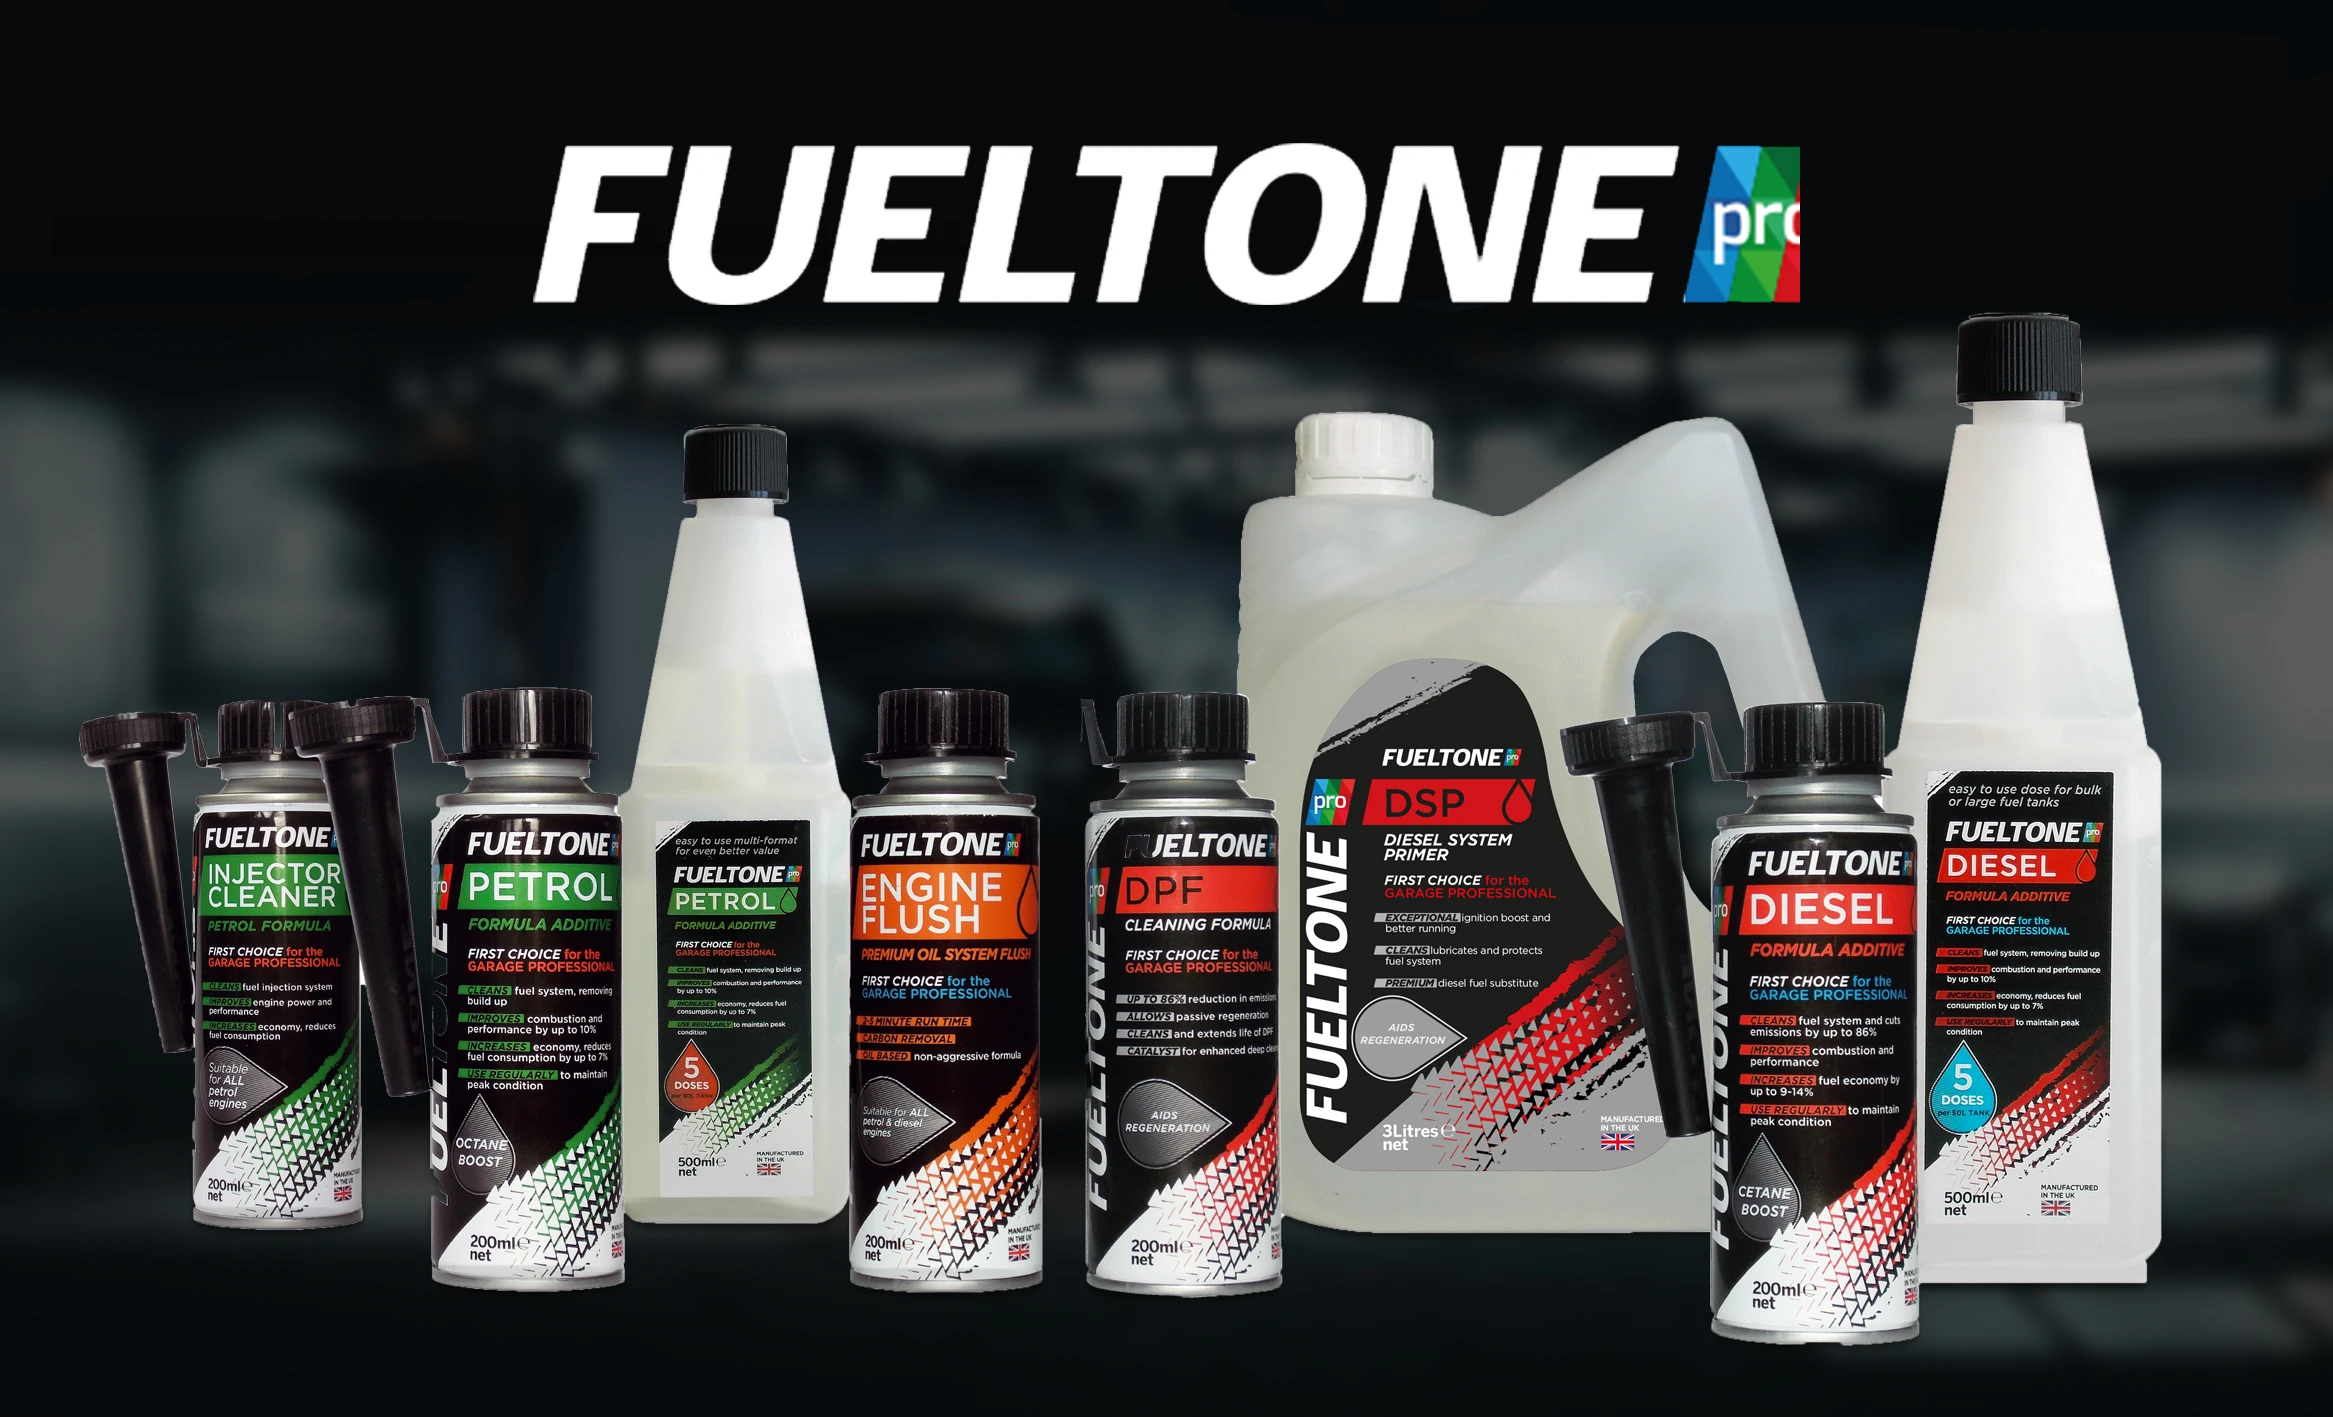 The Ultimate Guide to FUELTONE® PRO Products